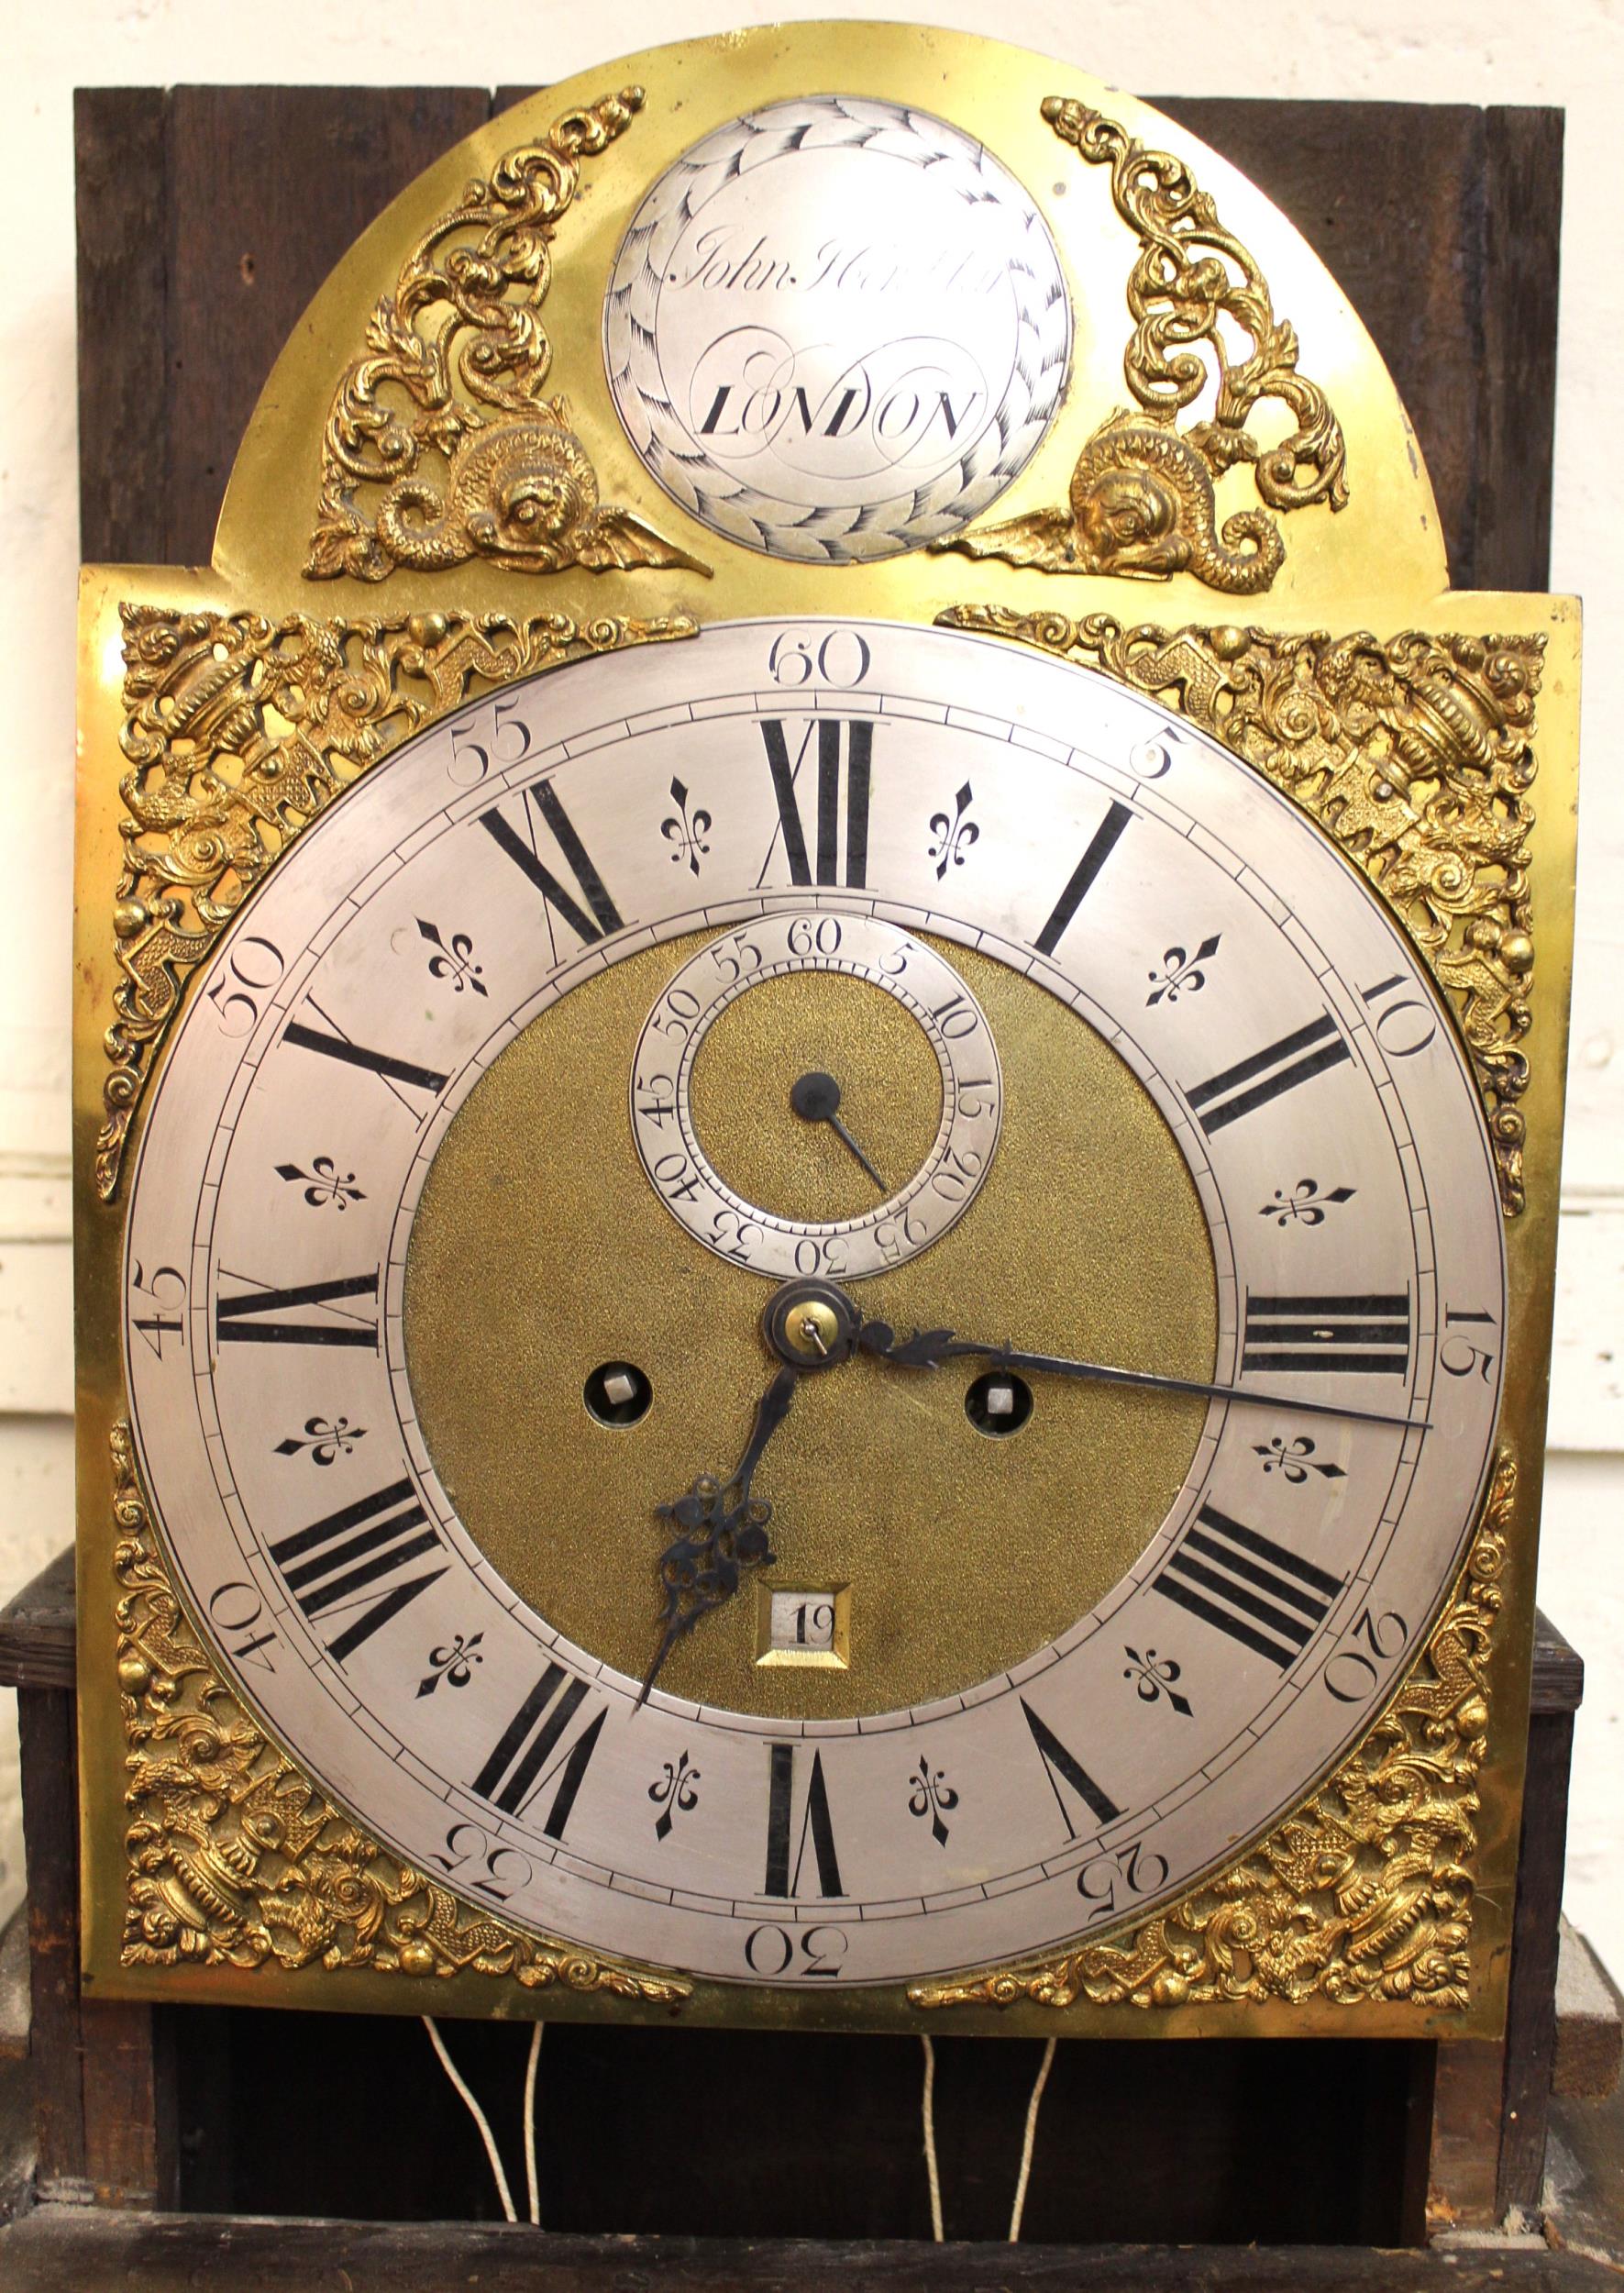 John Hewkley, 18th Century chinoiserie longcase clock, the pagoda top hood enclosing a brass dial - Image 3 of 20